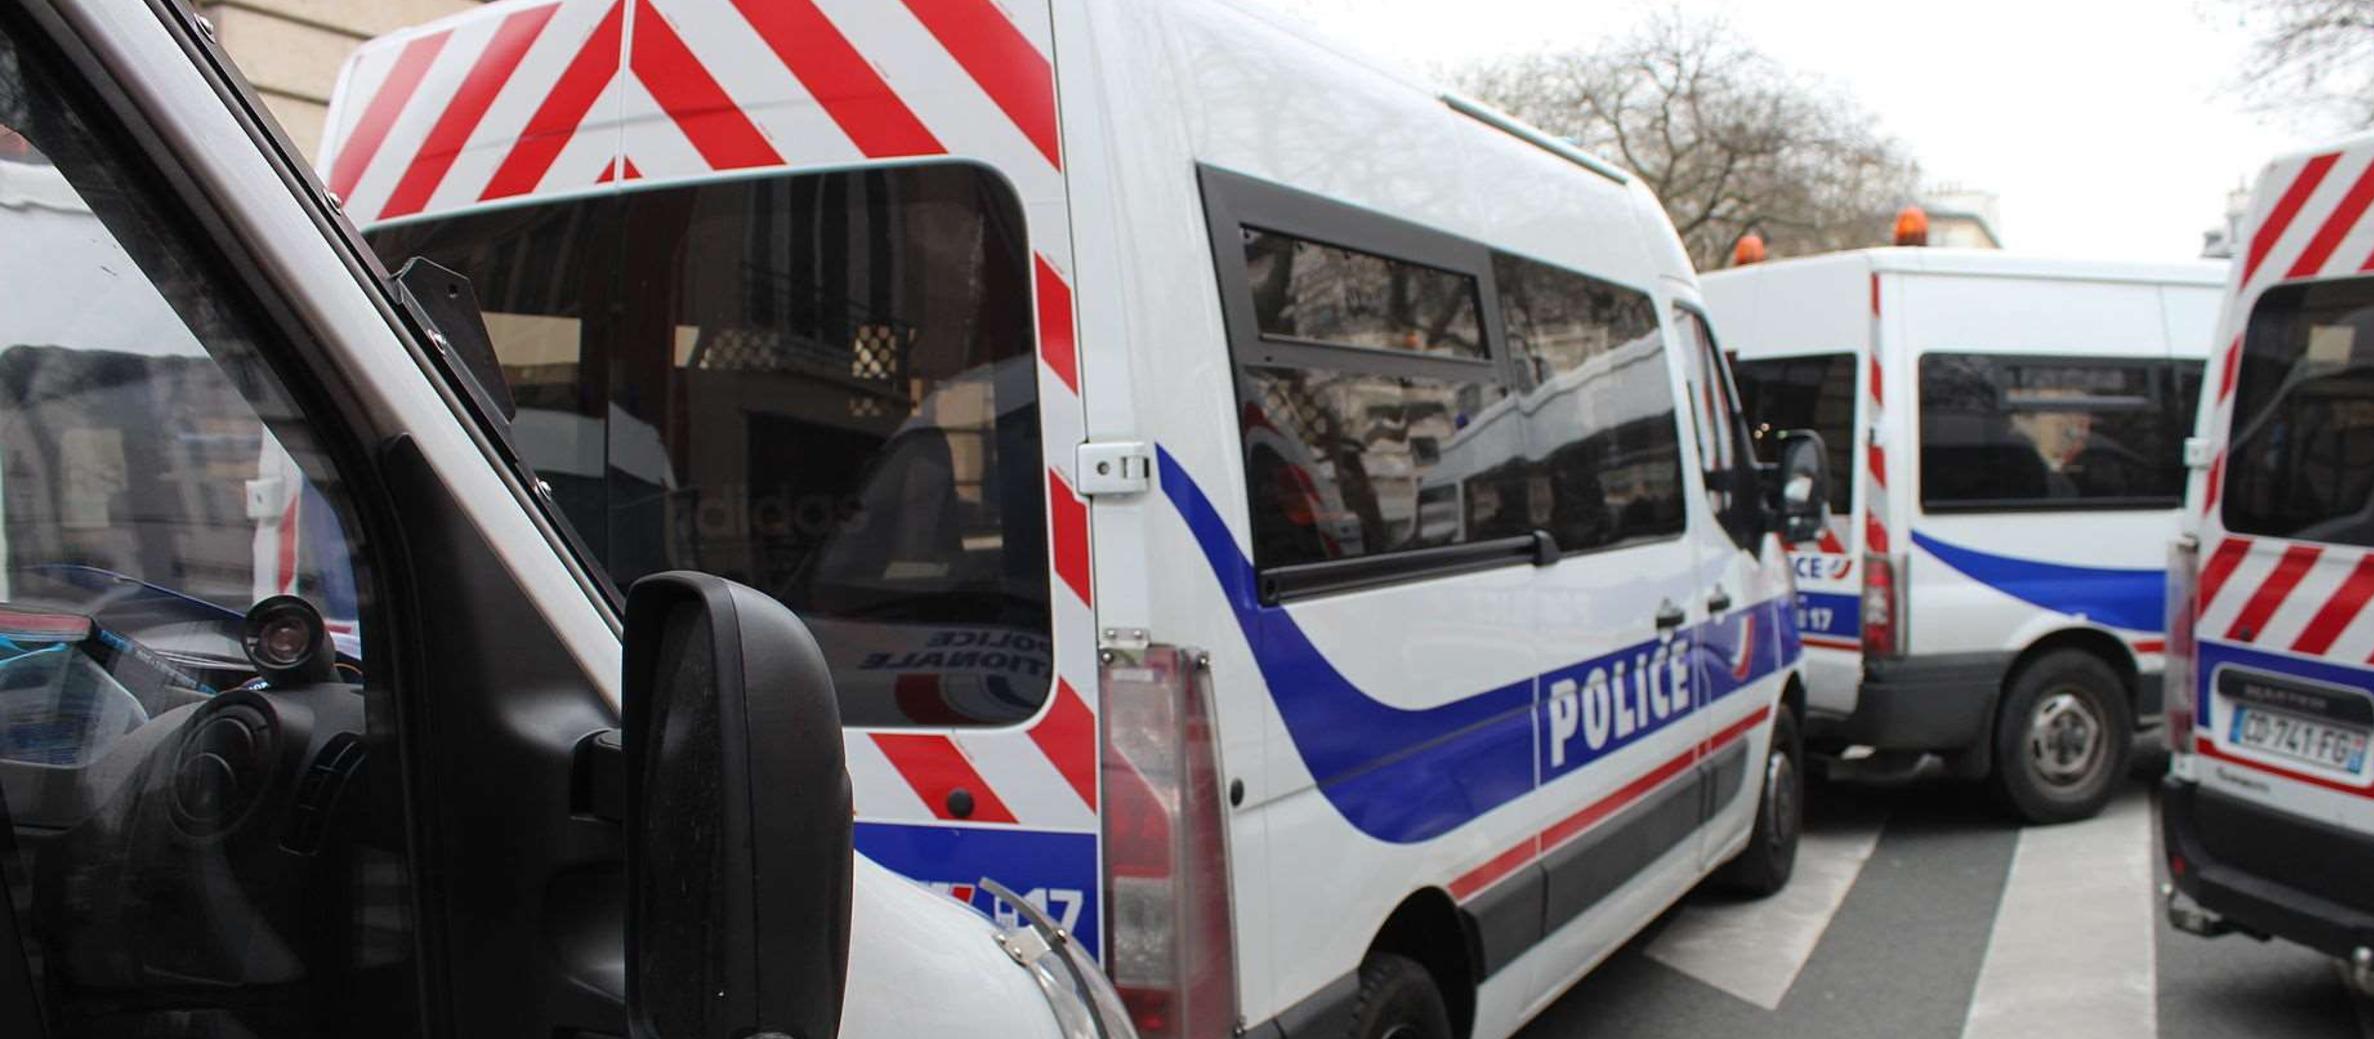 FRANCE: Three teens from Paris suburb arrested for attacking locksmith they thought was Jewish